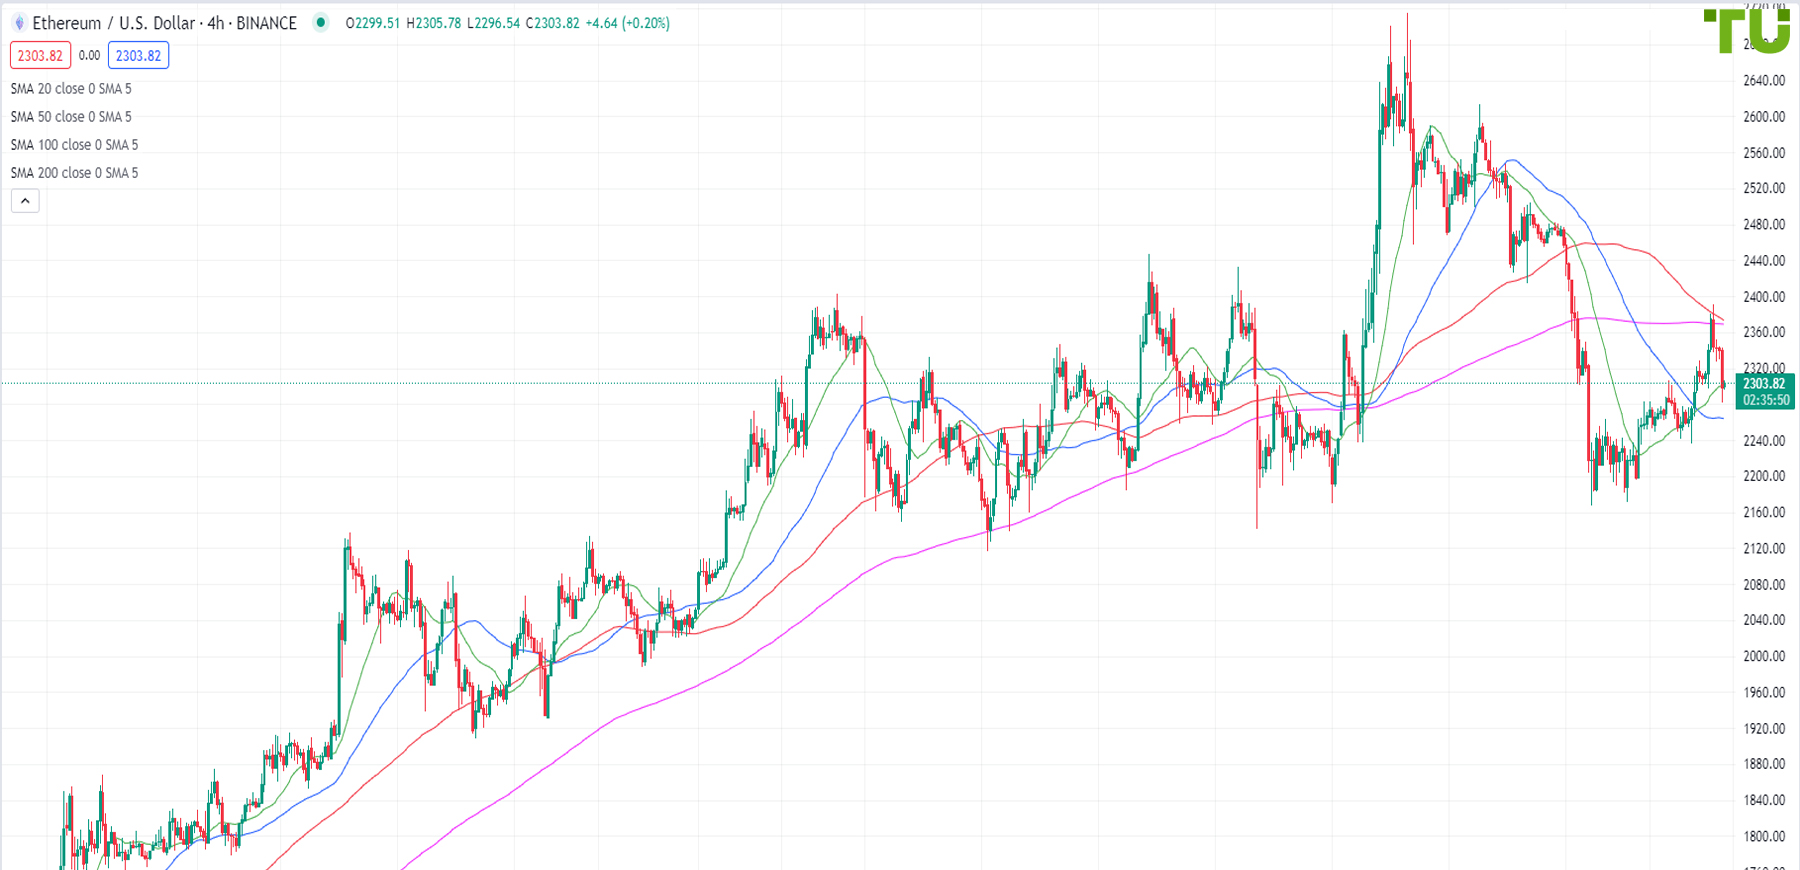 ETH/USD under pressure after recovery